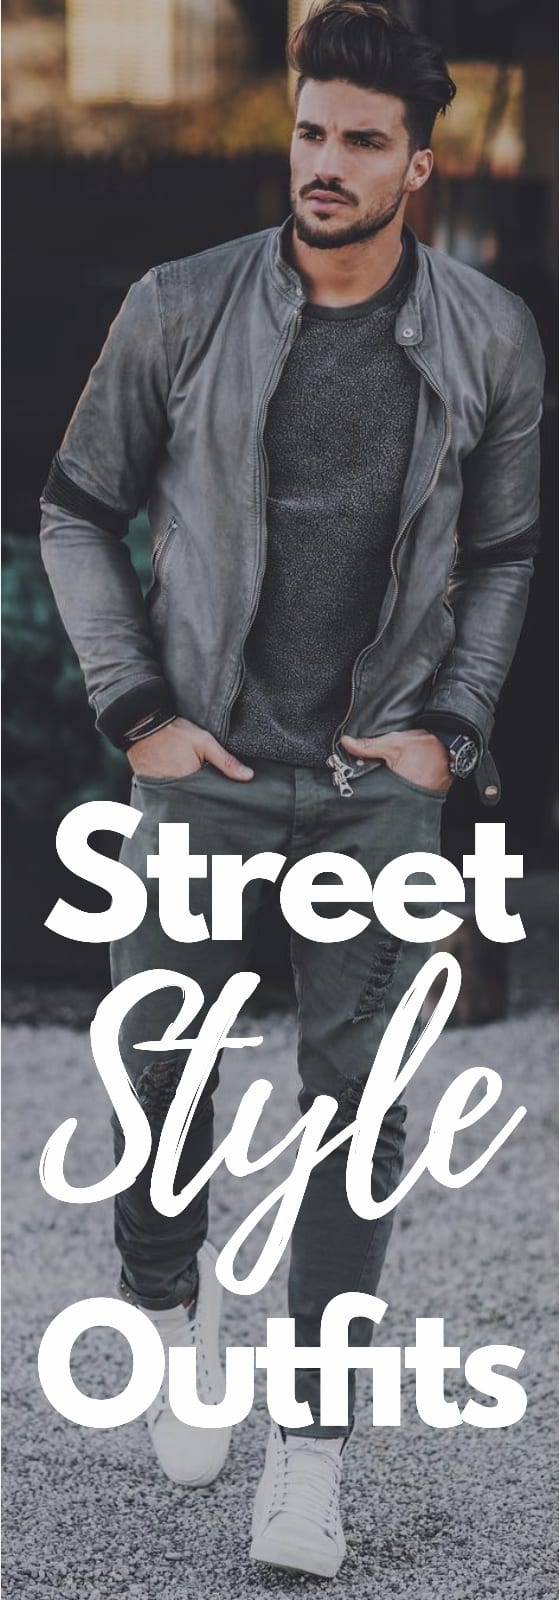 Street Style Outfits for men